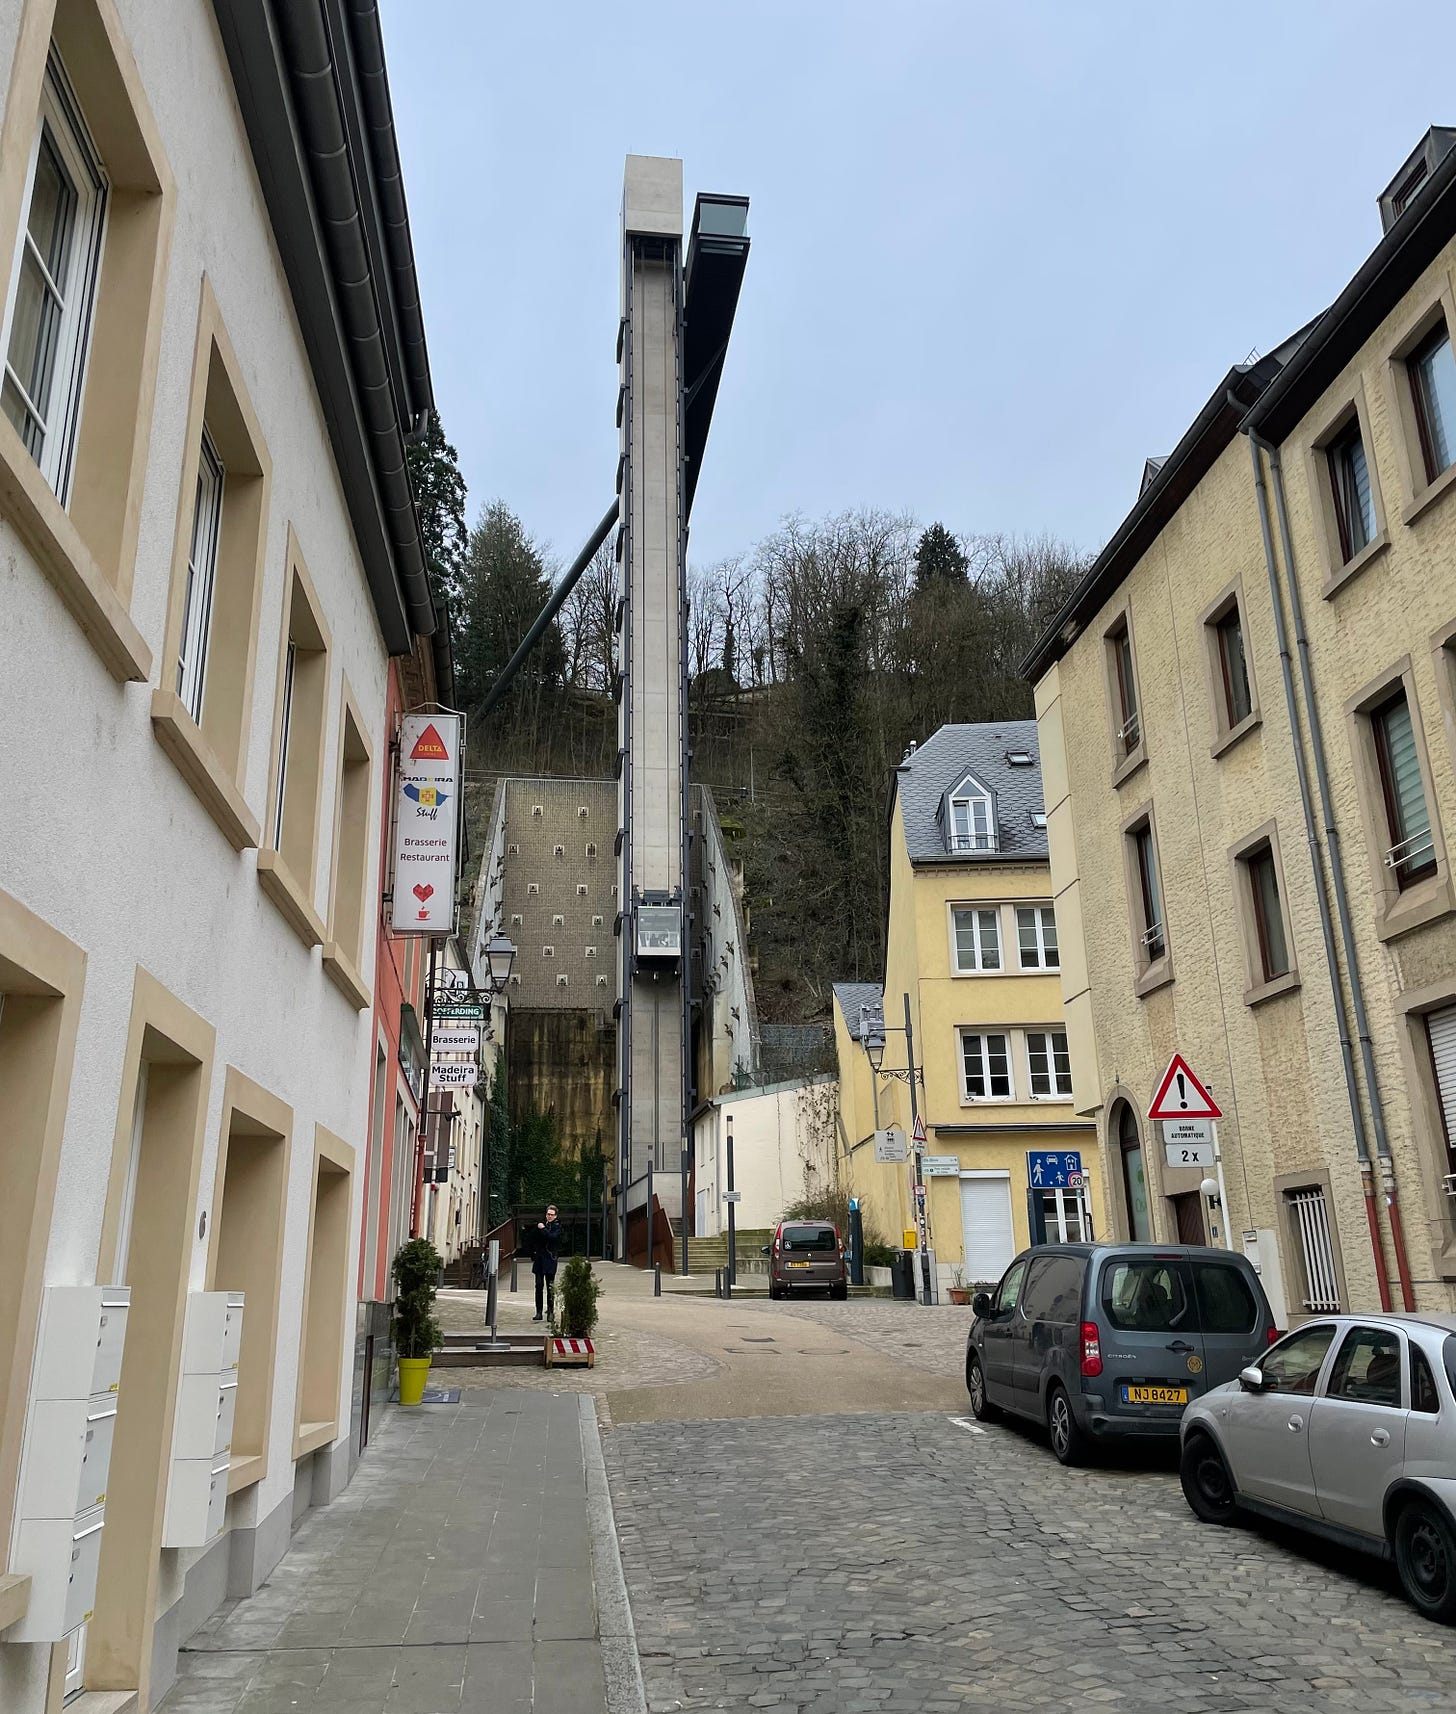 Luxembourg’s pedestrian (and runner?) elevator connects its lower and upper levels as a form of pubic transport.